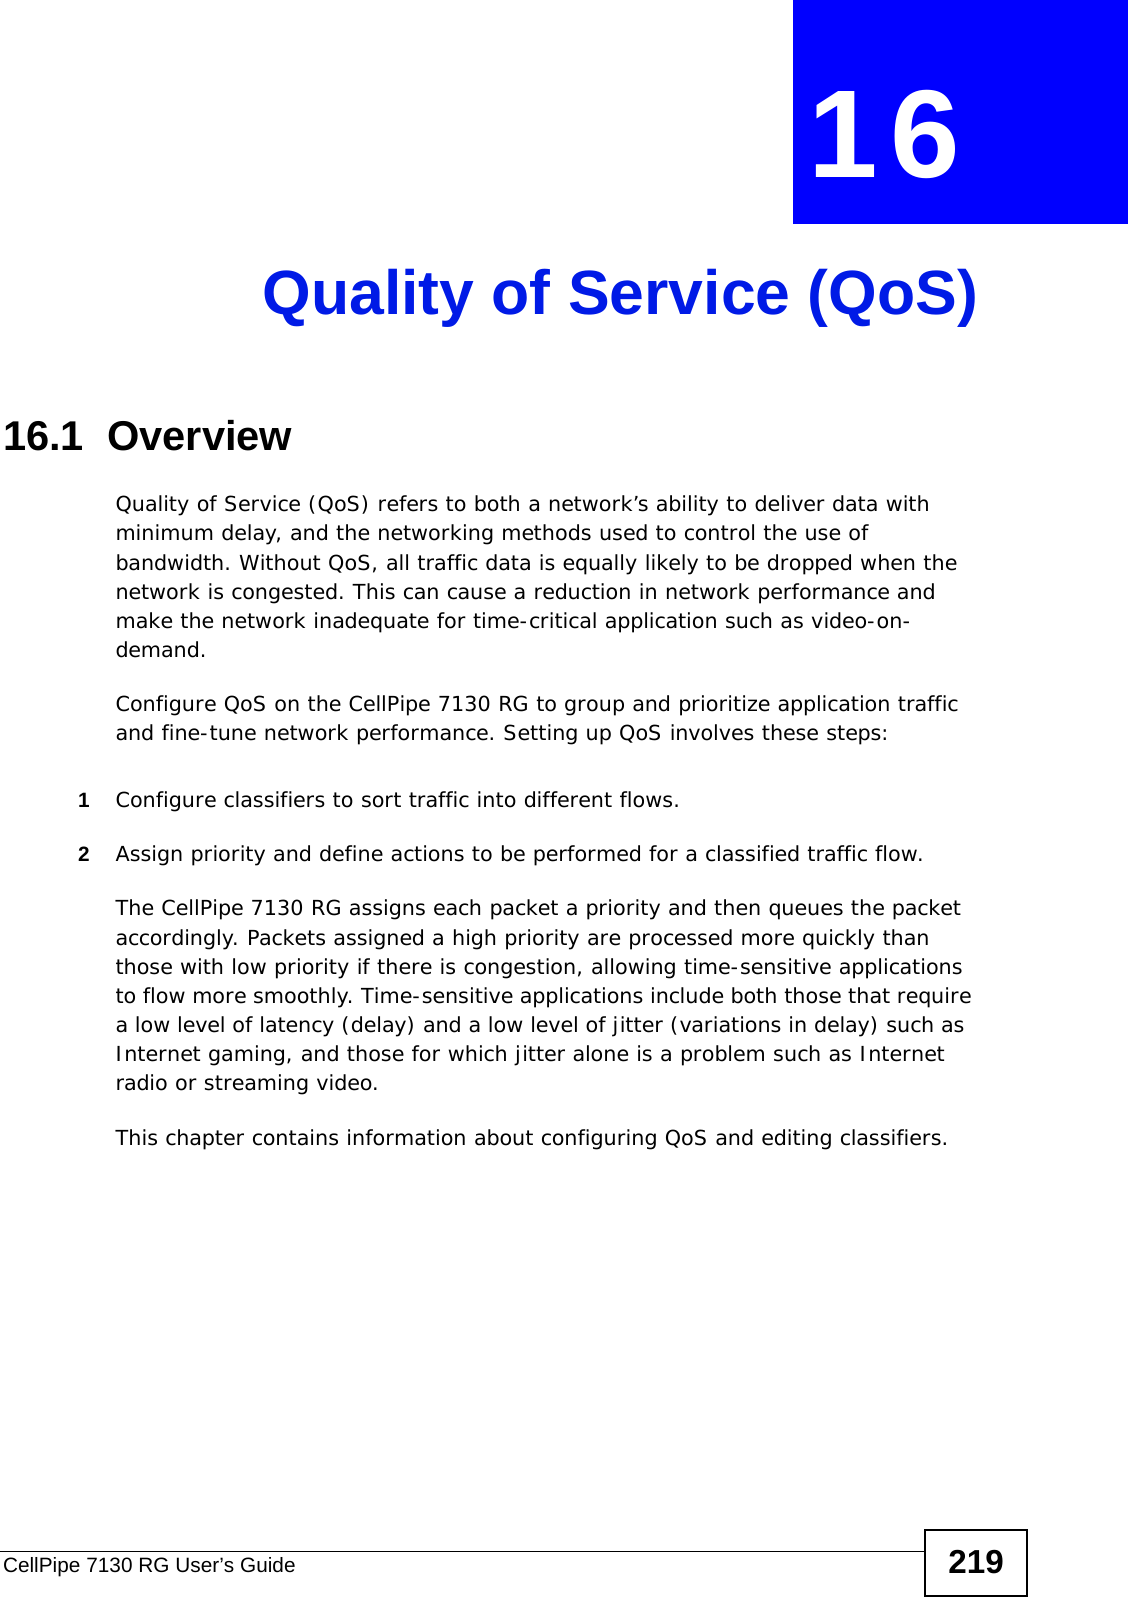 CellPipe 7130 RG User’s Guide 219CHAPTER  16 Quality of Service (QoS)16.1  Overview Quality of Service (QoS) refers to both a network’s ability to deliver data with minimum delay, and the networking methods used to control the use of bandwidth. Without QoS, all traffic data is equally likely to be dropped when the network is congested. This can cause a reduction in network performance and make the network inadequate for time-critical application such as video-on-demand.Configure QoS on the CellPipe 7130 RG to group and prioritize application traffic and fine-tune network performance. Setting up QoS involves these steps:1Configure classifiers to sort traffic into different flows. 2Assign priority and define actions to be performed for a classified traffic flow. The CellPipe 7130 RG assigns each packet a priority and then queues the packet accordingly. Packets assigned a high priority are processed more quickly than those with low priority if there is congestion, allowing time-sensitive applications to flow more smoothly. Time-sensitive applications include both those that require a low level of latency (delay) and a low level of jitter (variations in delay) such as  Internet gaming, and those for which jitter alone is a problem such as Internet radio or streaming video.This chapter contains information about configuring QoS and editing classifiers.